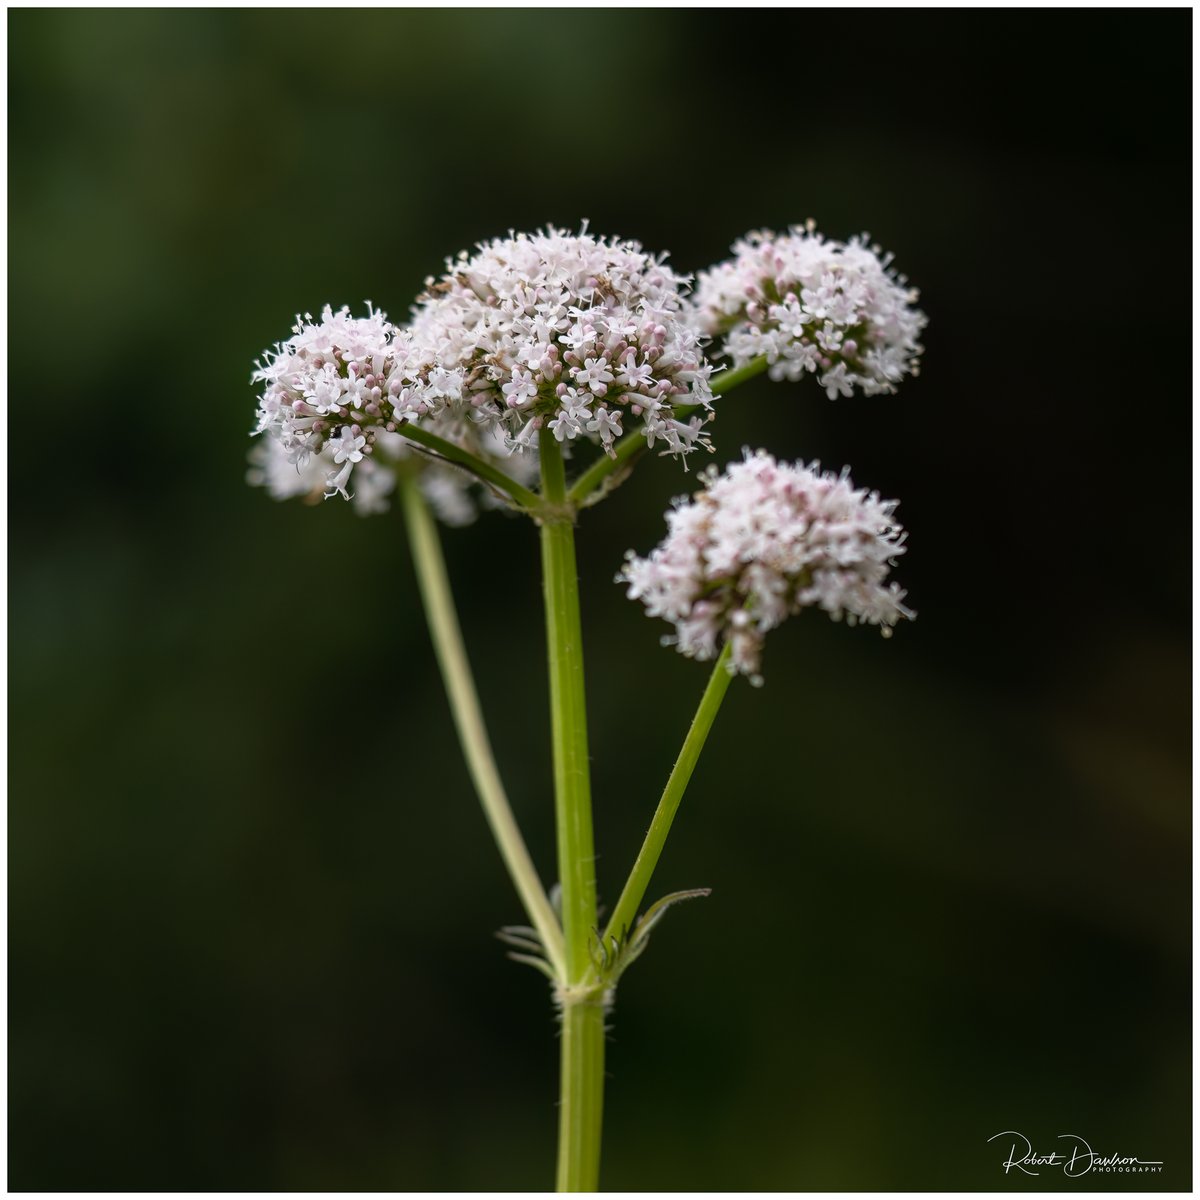 The Common Valerian was photographed on a recent trip to Bradford Bridge on Bodmin Moor with my local camera club.
#TheWeekendPhotographer
#photography #cornwall #kernow #bodminmoor #WexMondays